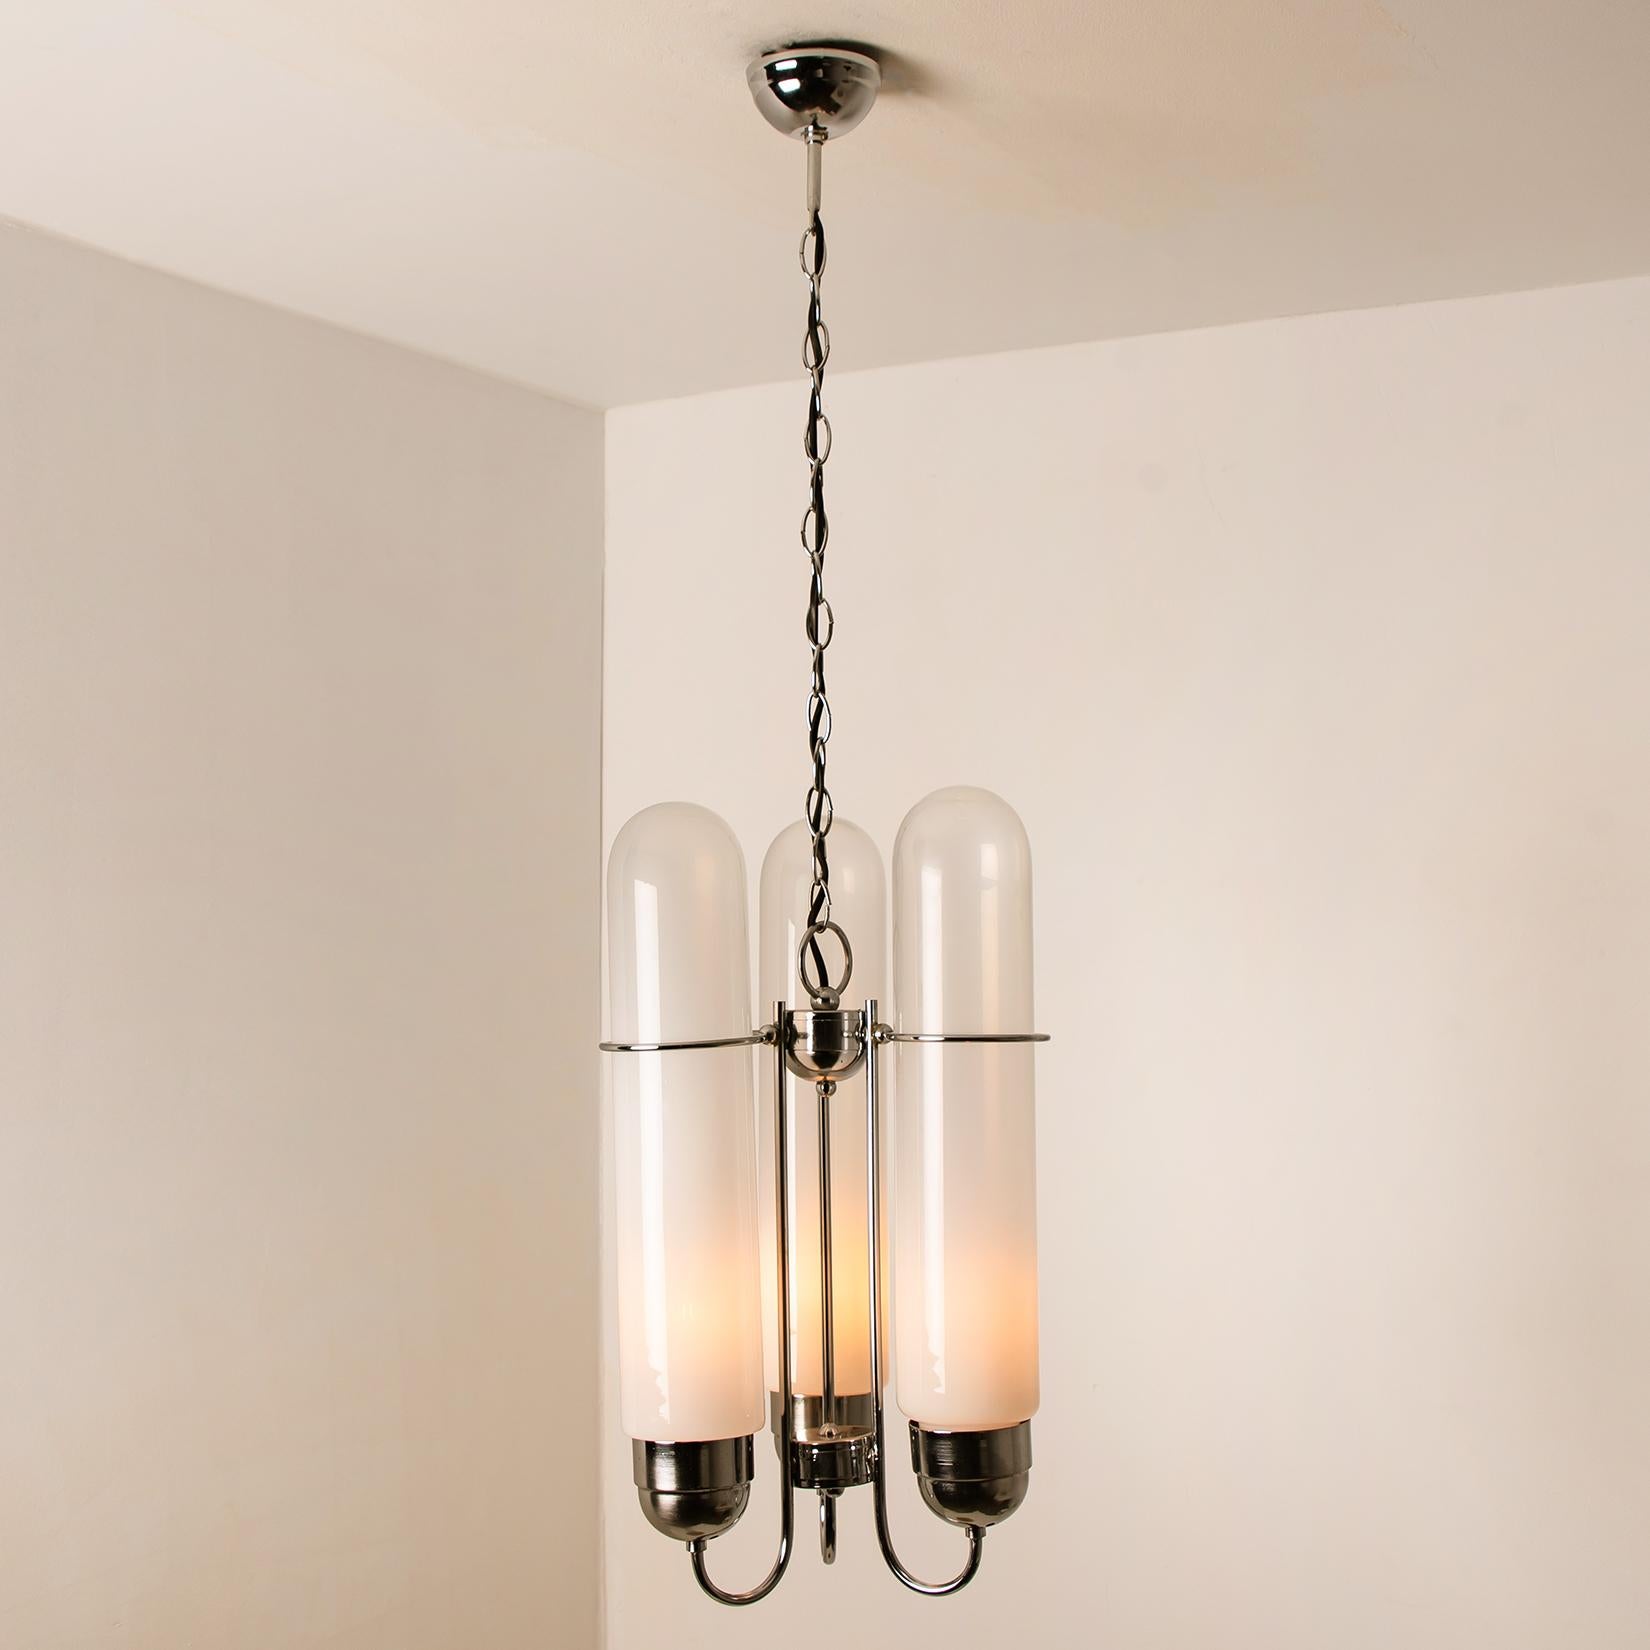 Torpedo chandelier by ldo Nason for AV Mazzega. Manufactured in midcentury, circa 1970 (at the end of 1960s and beginning of 1970s). Handmade and high quality piece. 3 hand blown Murano opaque/milky crystal glass “torpedoes”. Chromed metal parts